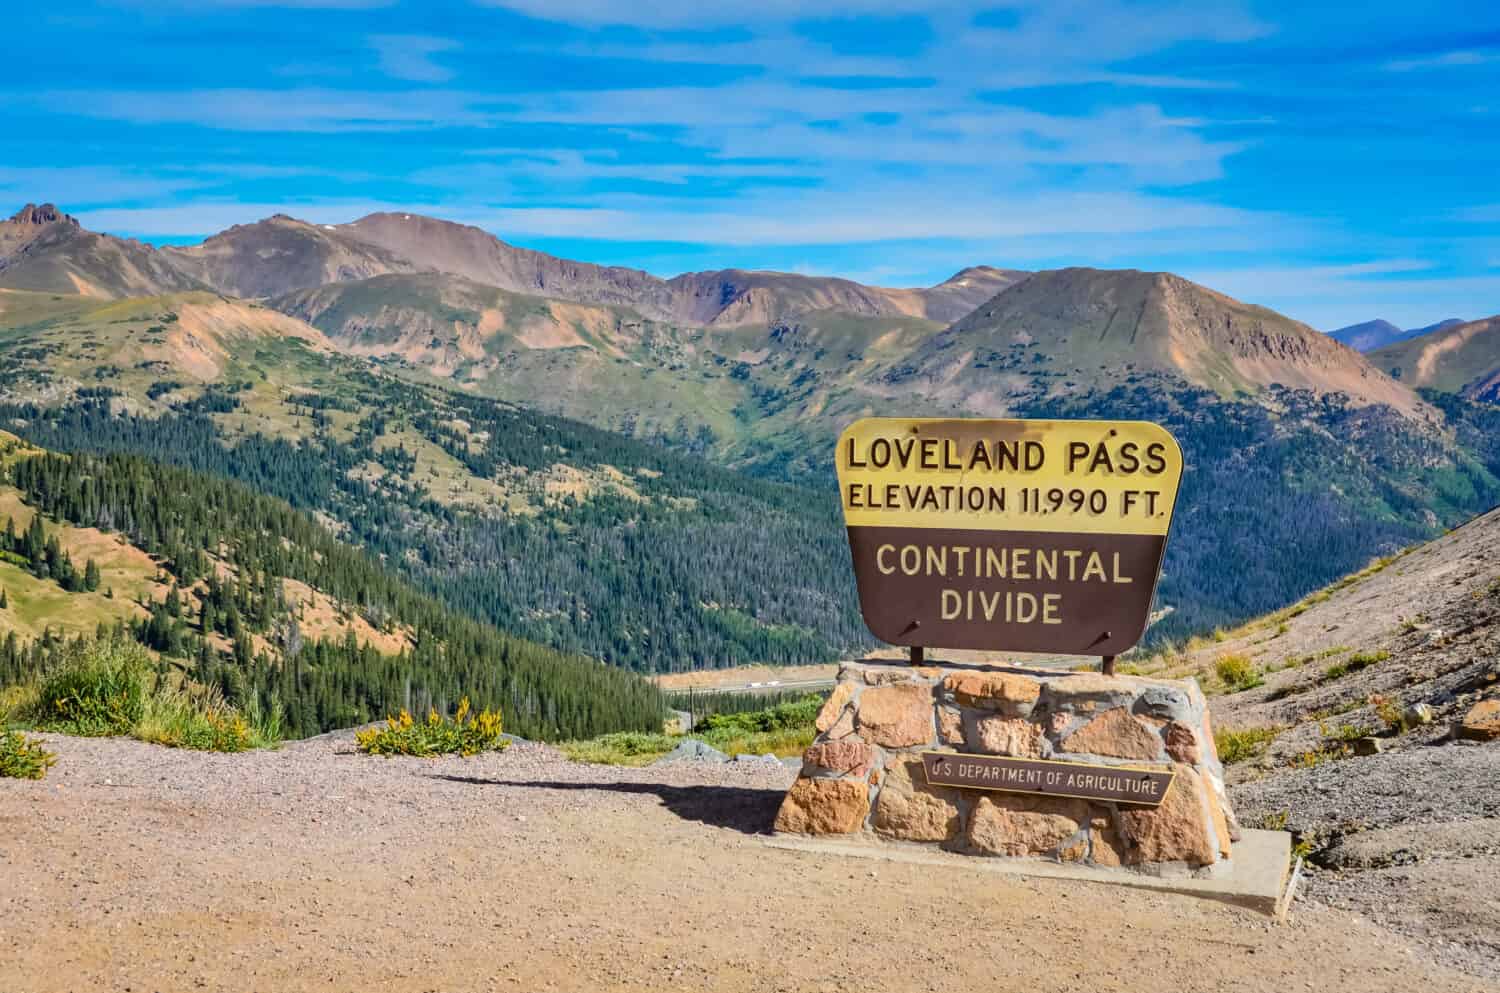 A scenic view of Loveland Pass, a mountain pass in Colorado known for its incredible views and rich history.